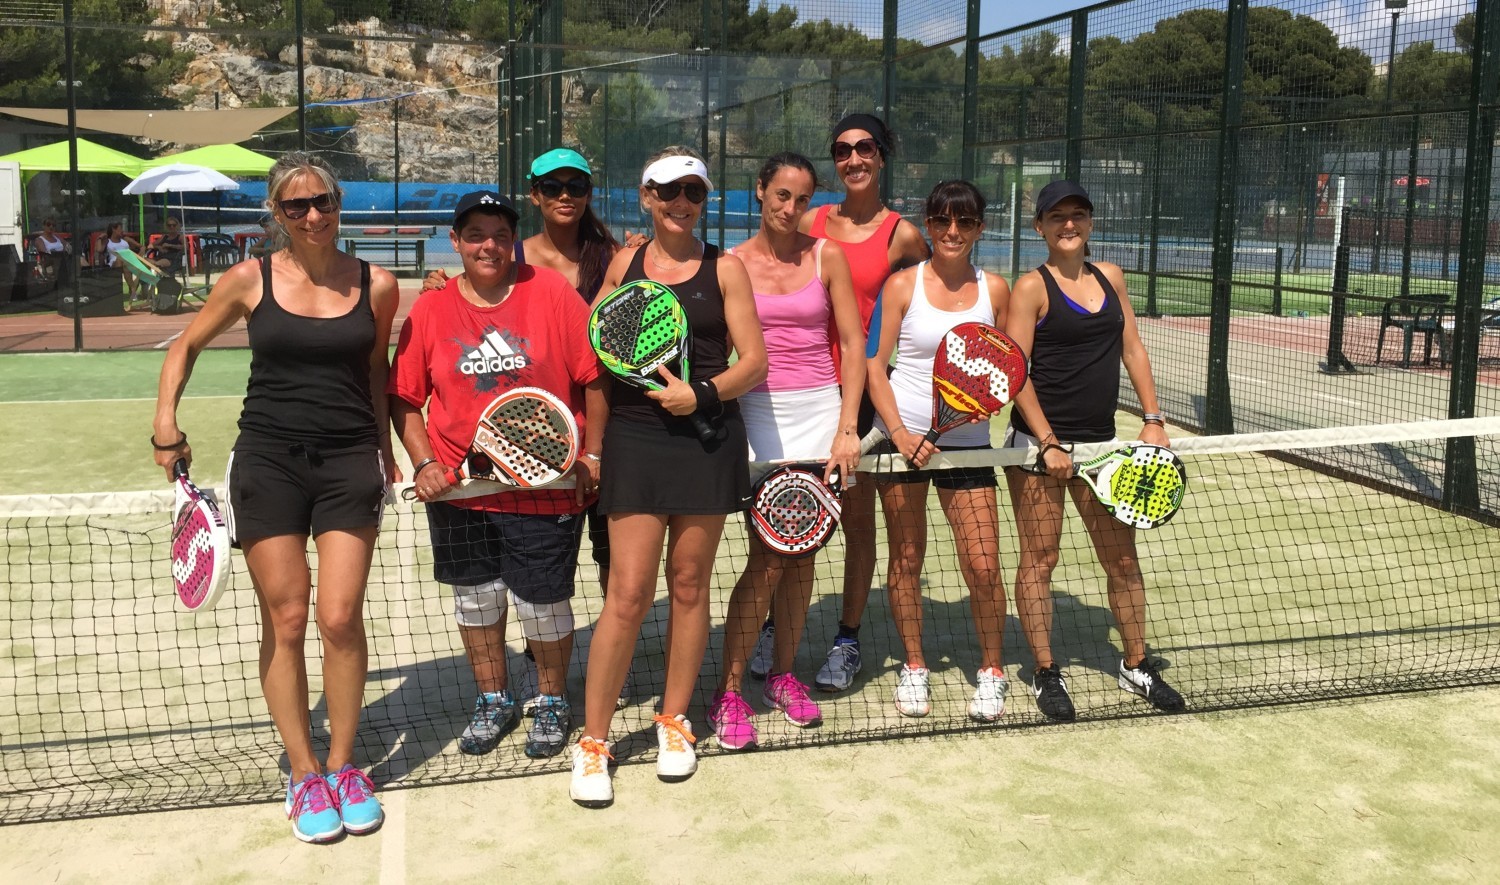 Summary of the tournaments of Cassis and Orléans